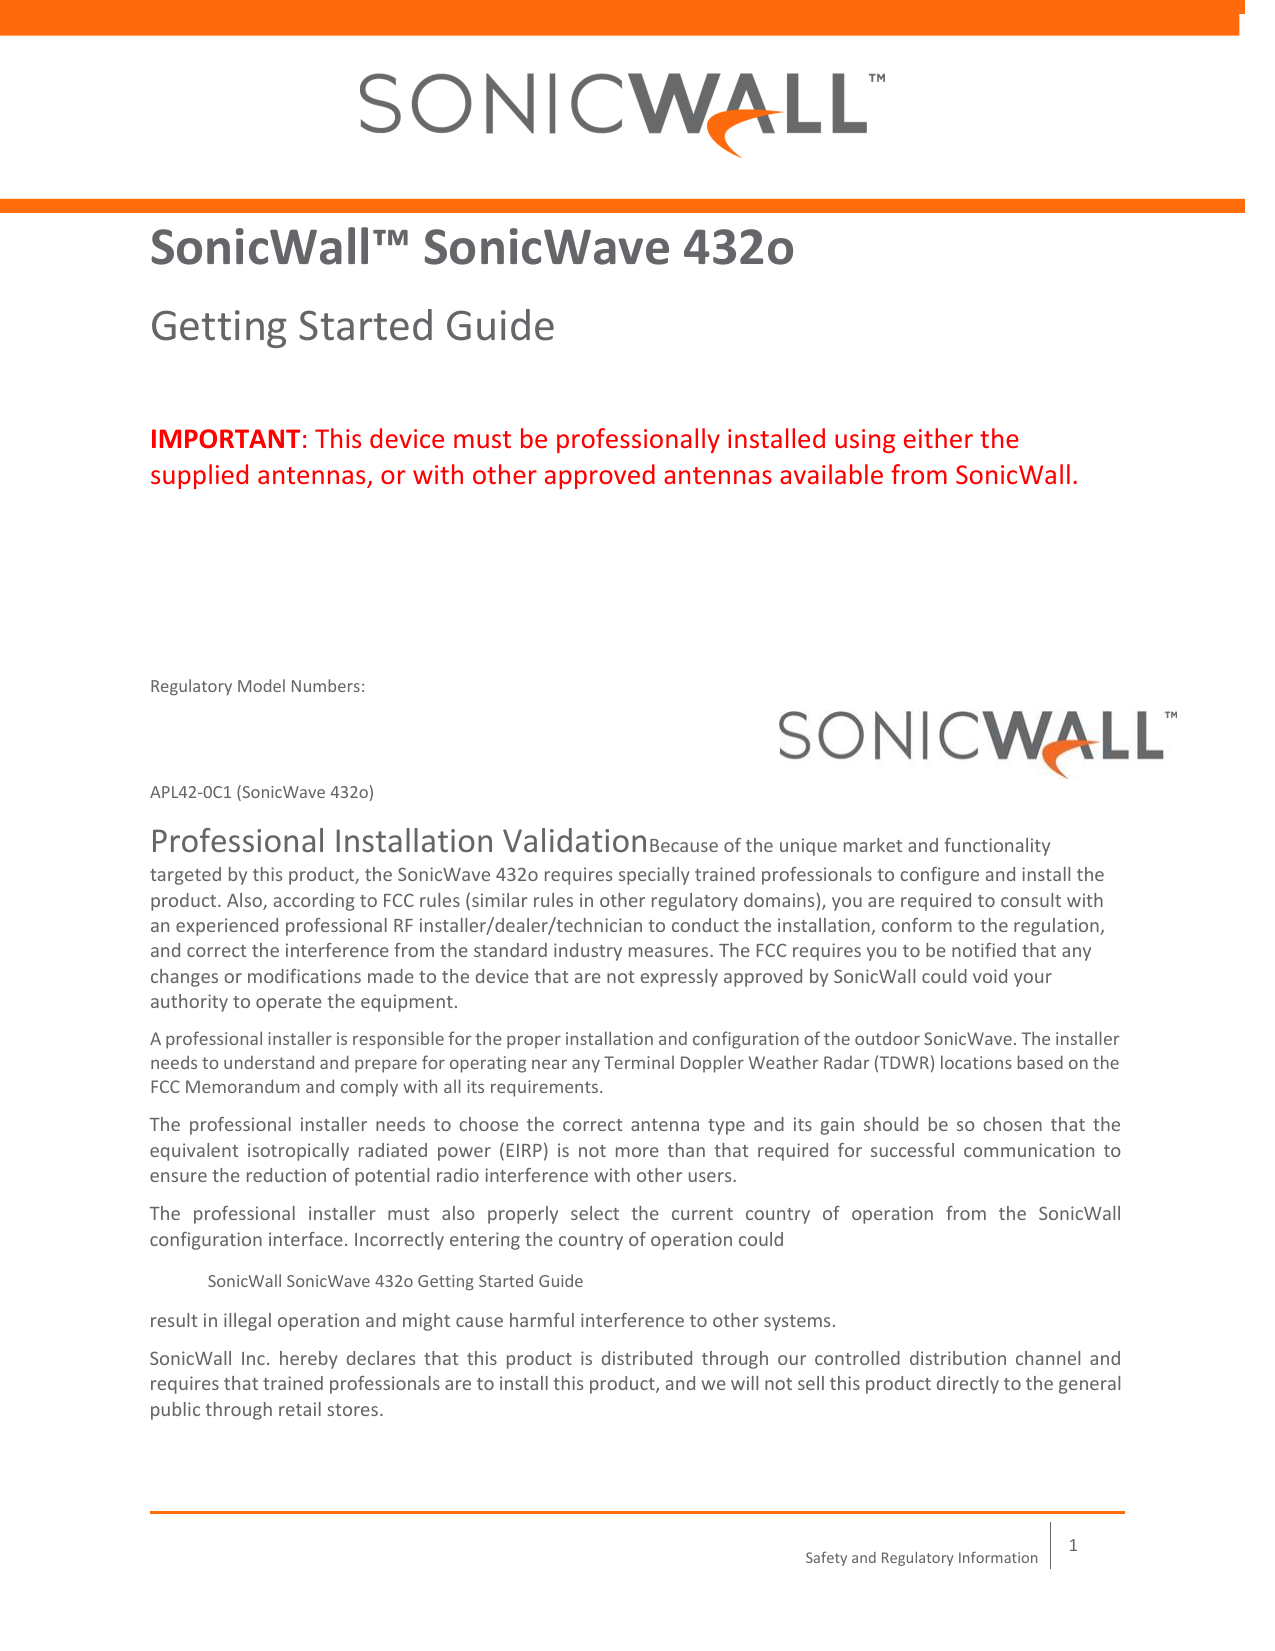    1 Safety and Regulatory Information  SonicWall™ SonicWave 432o Getting Started Guide IMPORTANT: This device must be professionally installed using either the supplied antennas, or with other approved antennas available from SonicWall. Regulatory Model Numbers:  APL42‐0C1 (SonicWave 432o) Professional Installation ValidationBecause of the unique market and functionality targeted by this product, the SonicWave 432o requires specially trained professionals to configure and install the product. Also, according to FCC rules (similar rules in other regulatory domains), you are required to consult with an experienced professional RF installer/dealer/technician to conduct the installation, conform to the regulation, and correct the interference from the standard industry measures. The FCC requires you to be notified that any changes or modifications made to the device that are not expressly approved by SonicWall could void your authority to operate the equipment. A professional installer is responsible for the proper installation and configuration of the outdoor SonicWave. The installer needs to understand and prepare for operating near any Terminal Doppler Weather Radar (TDWR) locations based on the FCC Memorandum and comply with all its requirements. The  professional installer  needs to choose  the correct antenna type and  its  gain  should be  so  chosen  that  the equivalent  isotropically  radiated  power  (EIRP)  is  not  more  than  that  required  for  successful  communication  to ensure the reduction of potential radio interference with other users. The  professional  installer  must  also  properly  select  the  current  country  of  operation  from  the  SonicWall configuration interface. Incorrectly entering the country of operation could  SonicWall SonicWave 432o Getting Started Guide result in illegal operation and might cause harmful interference to other systems. SonicWall  Inc.  hereby  declares  that  this  product  is  distributed  through  our  controlled  distribution channel  and requires that trained professionals are to install this product, and we will not sell this product directly to the general public through retail stores. 